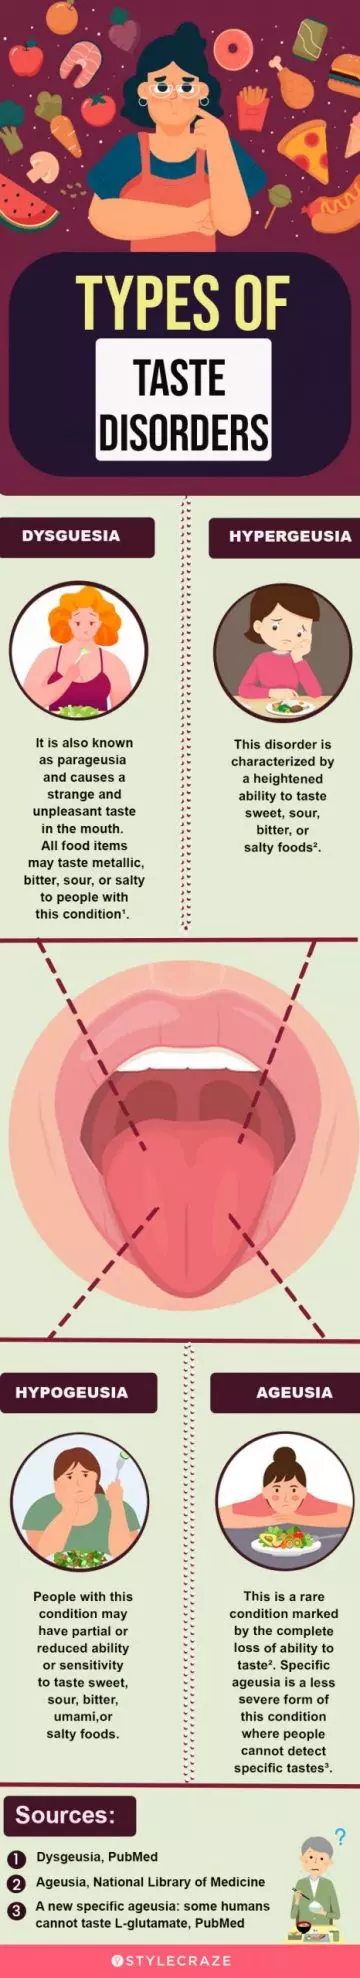 types of taste disoders (infographic)